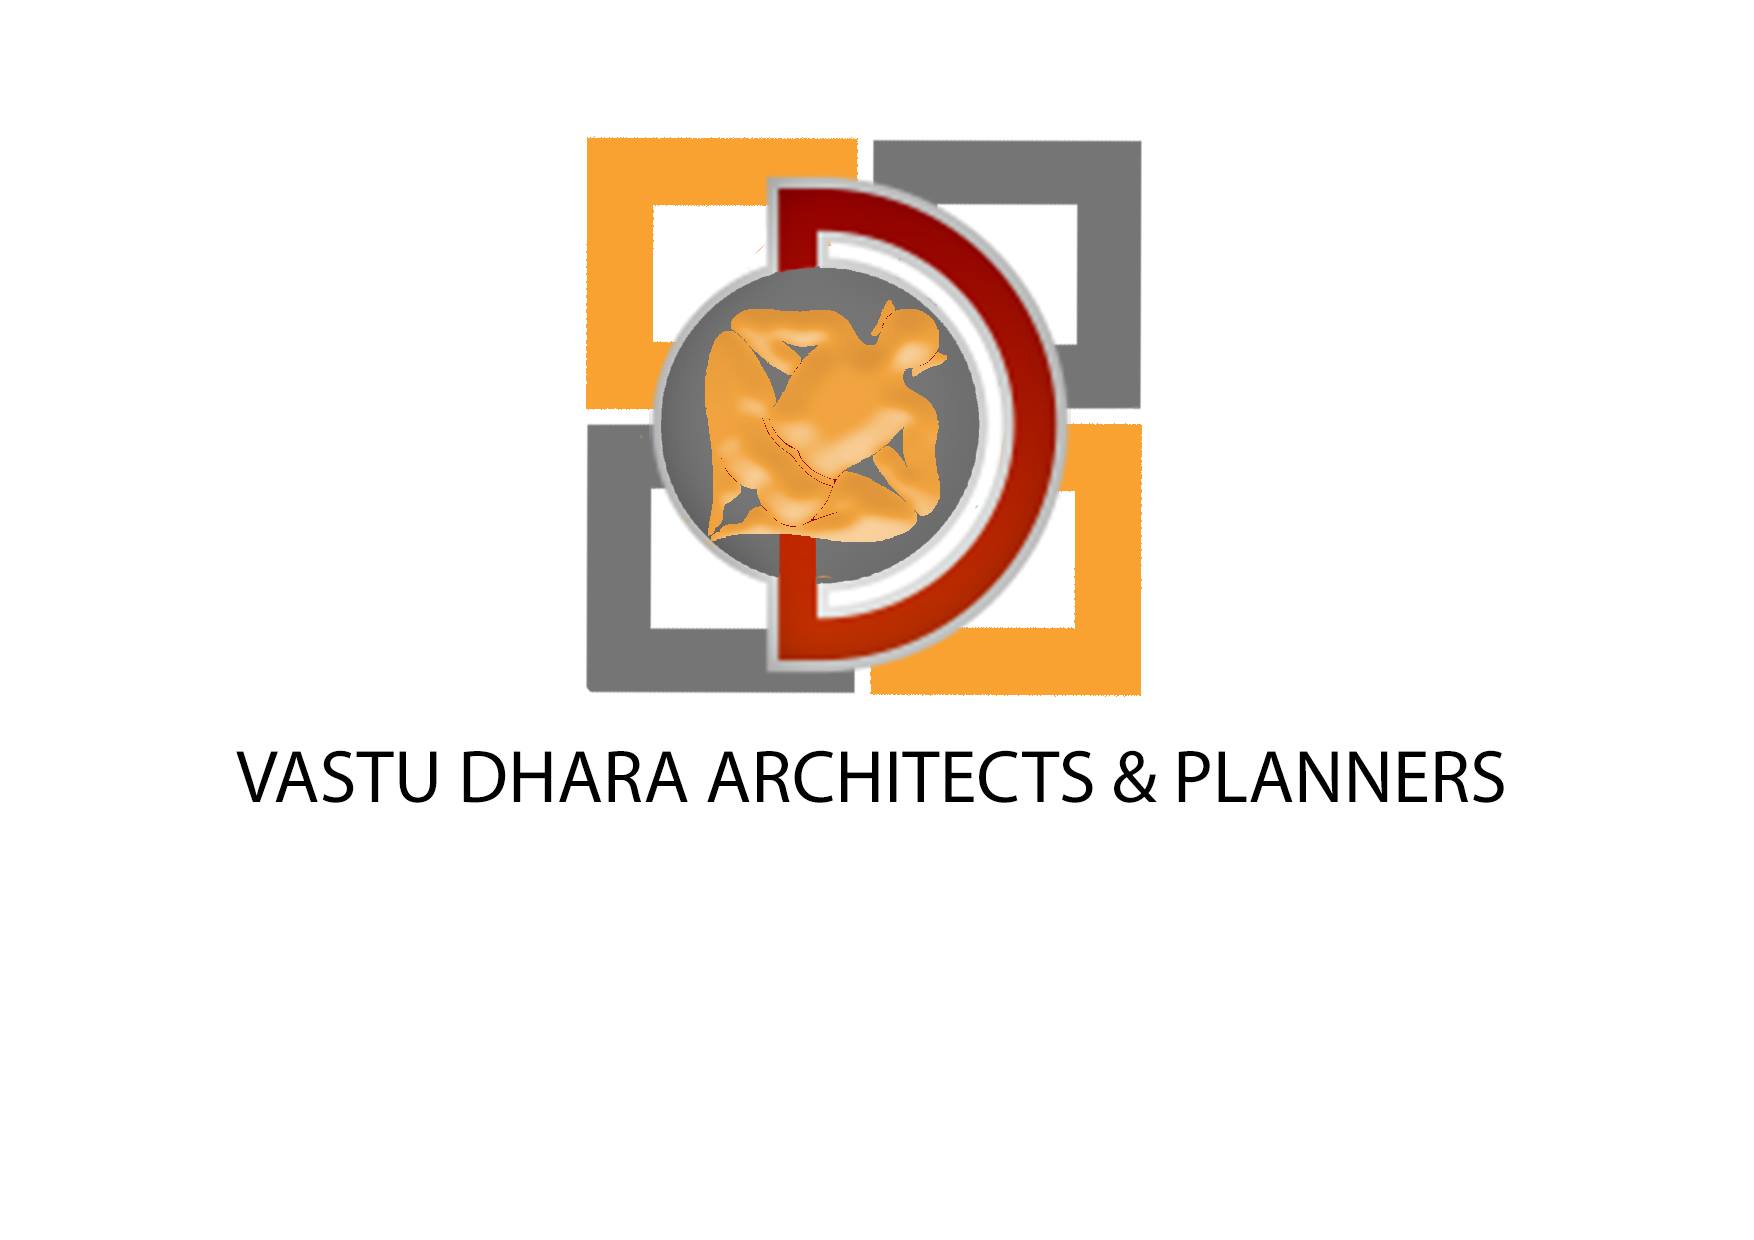 VASTU DHARA ARCHITECTS & PLANNERS|Legal Services|Professional Services